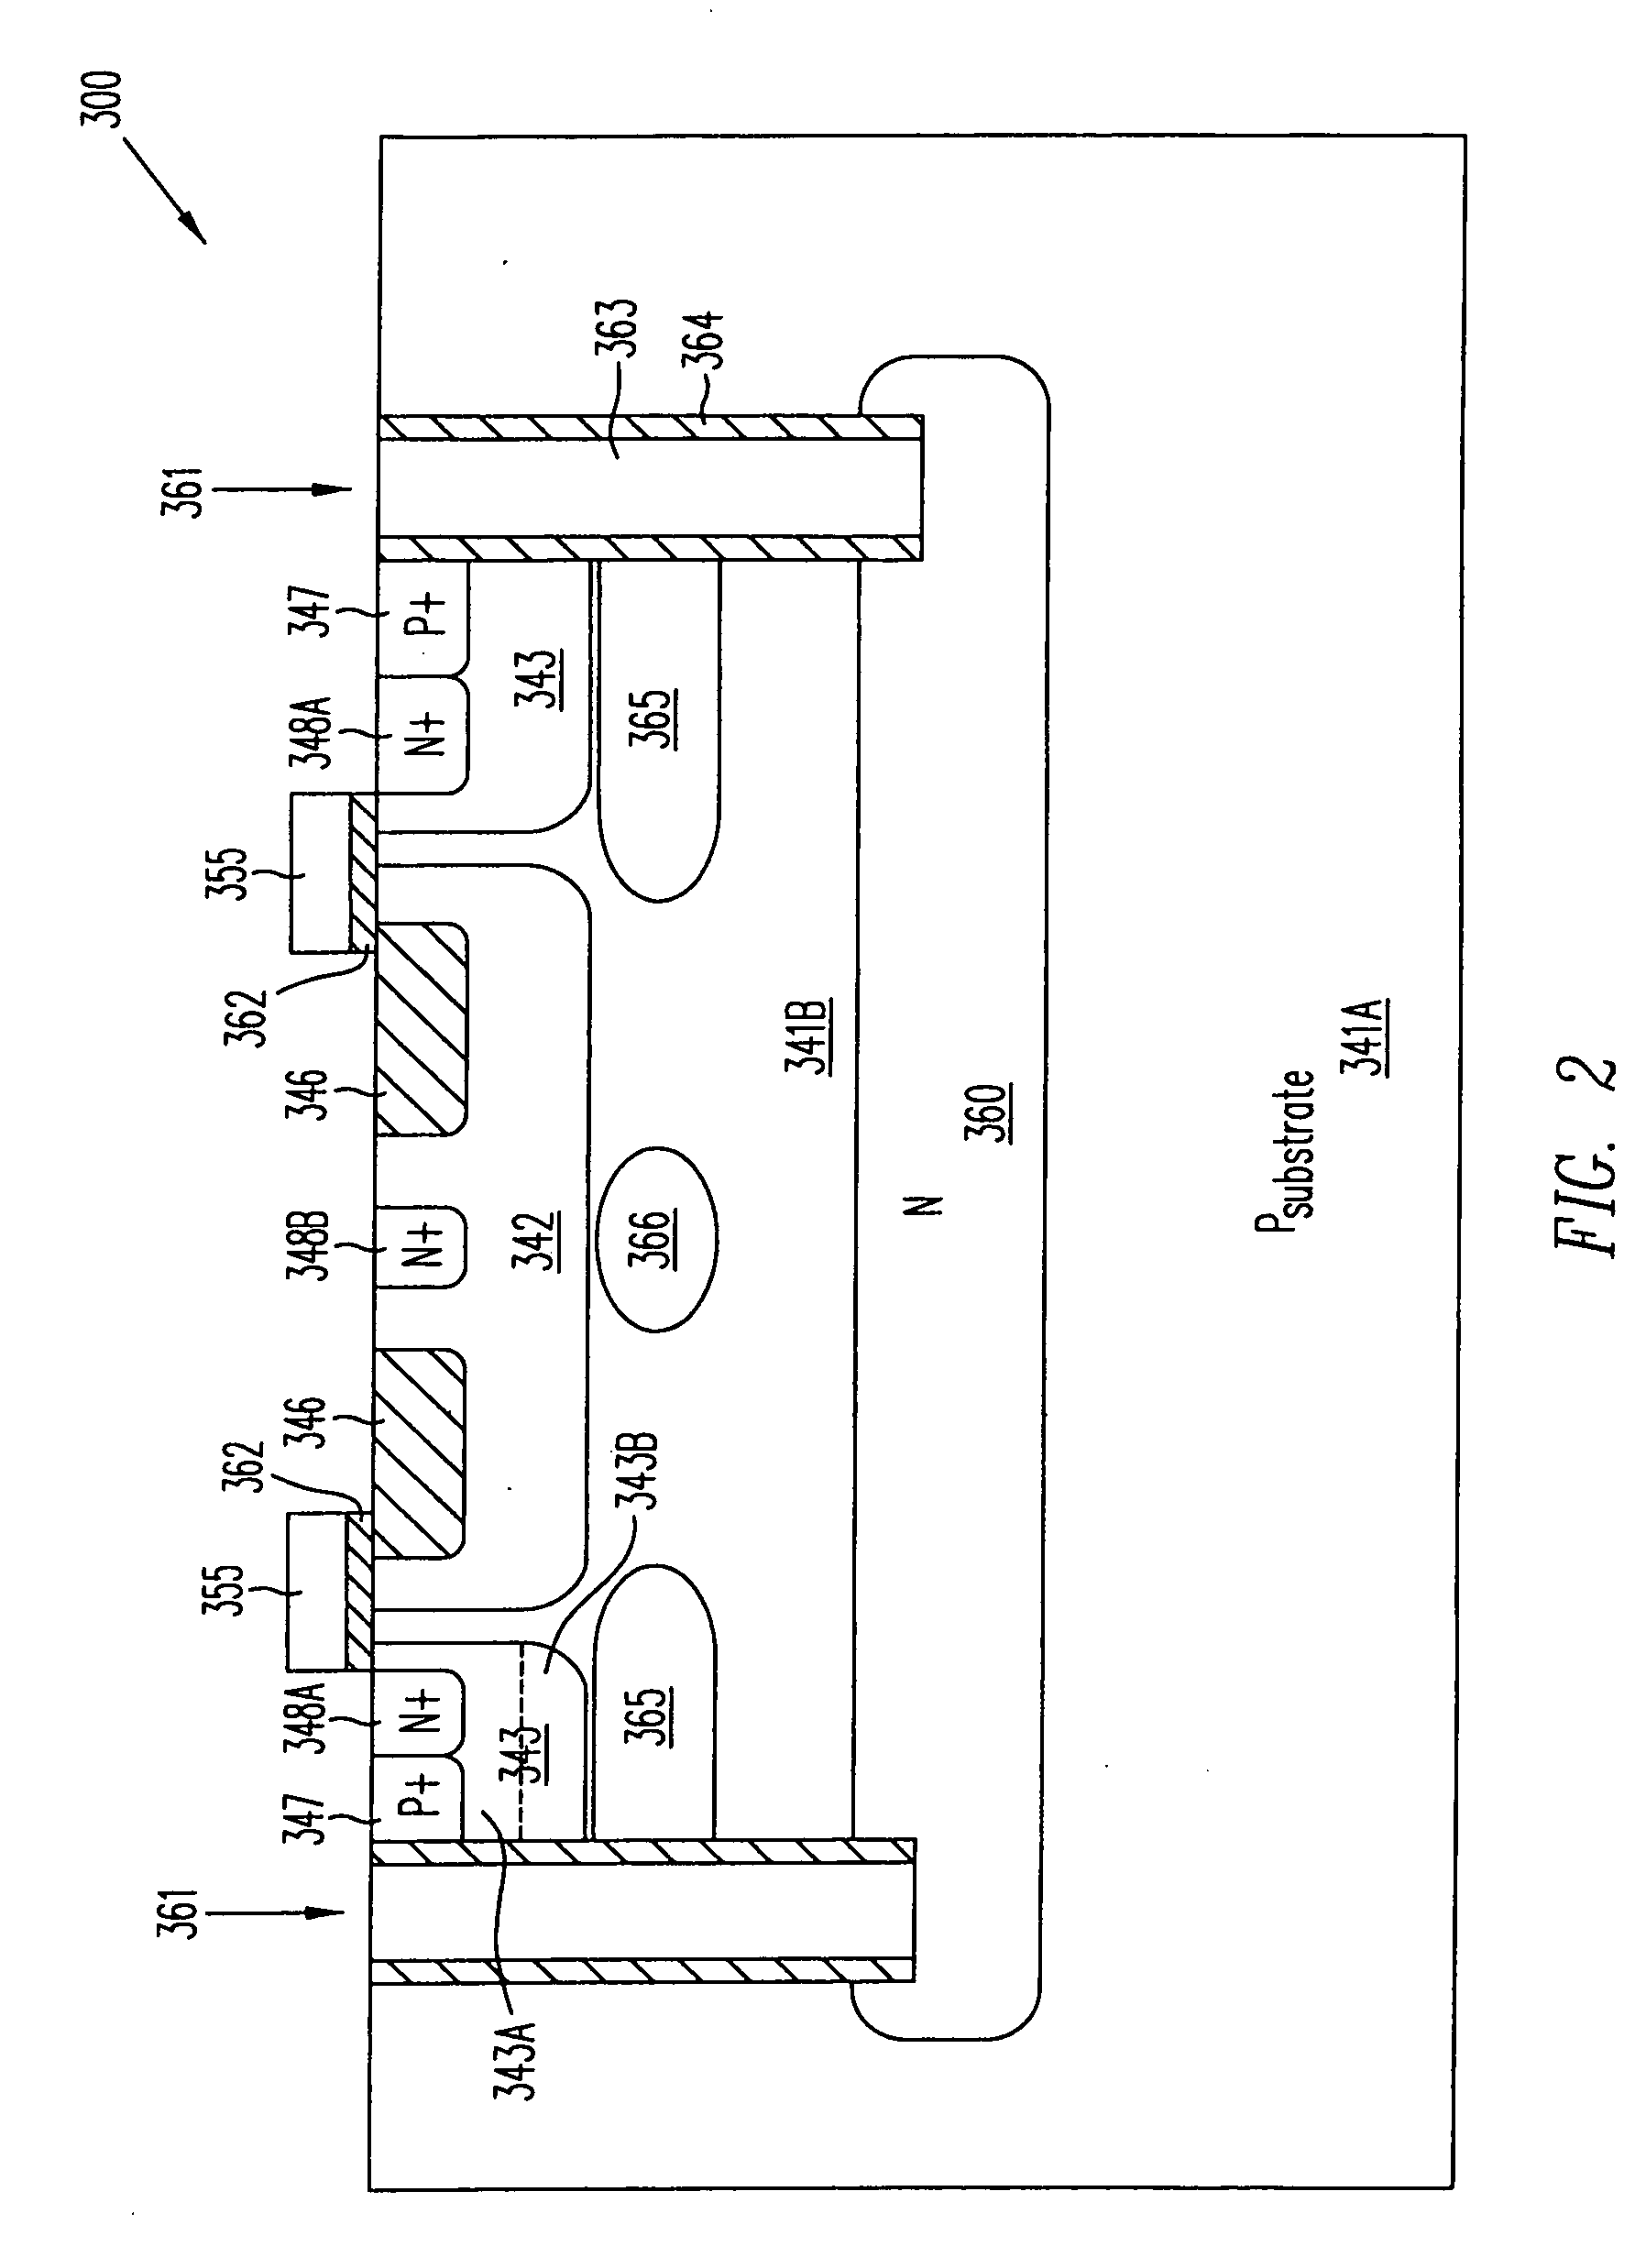 Isolated junction field-effect transistor